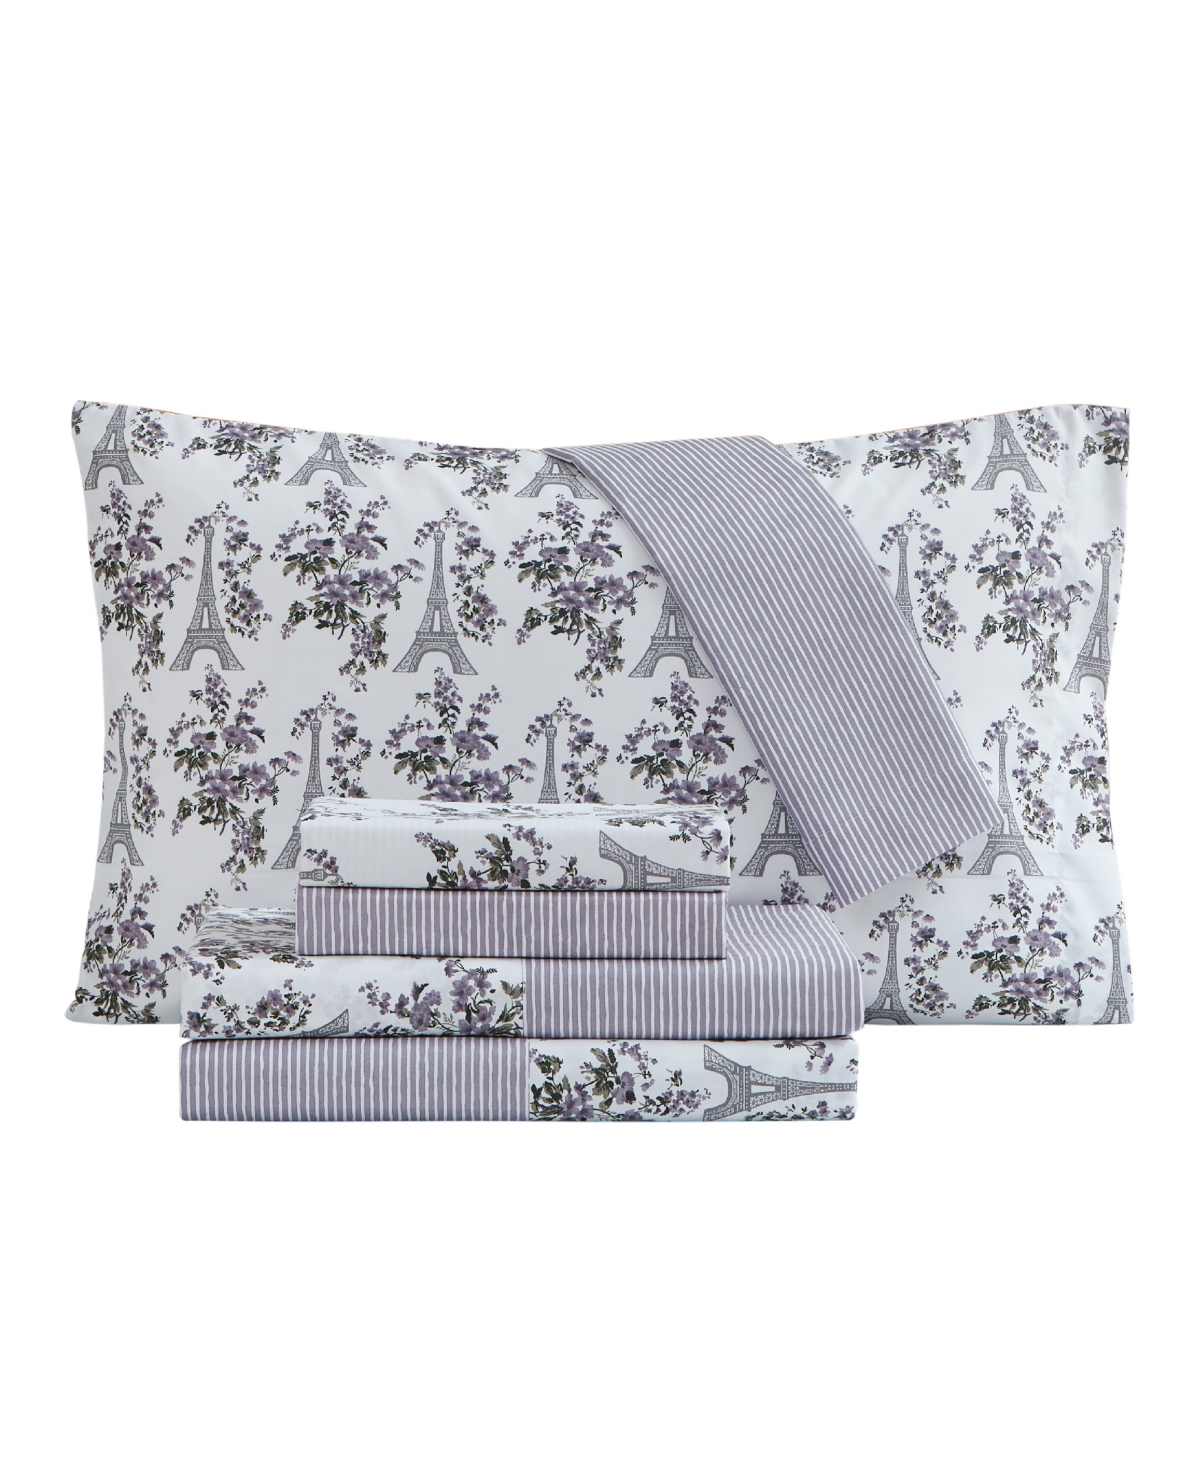 Jessica Sanders Parisian Turnstyle Reversible Printed Super Soft Deep Pocket Twin Sheet Set, 4 Pieces Bedding In Dusty Purple